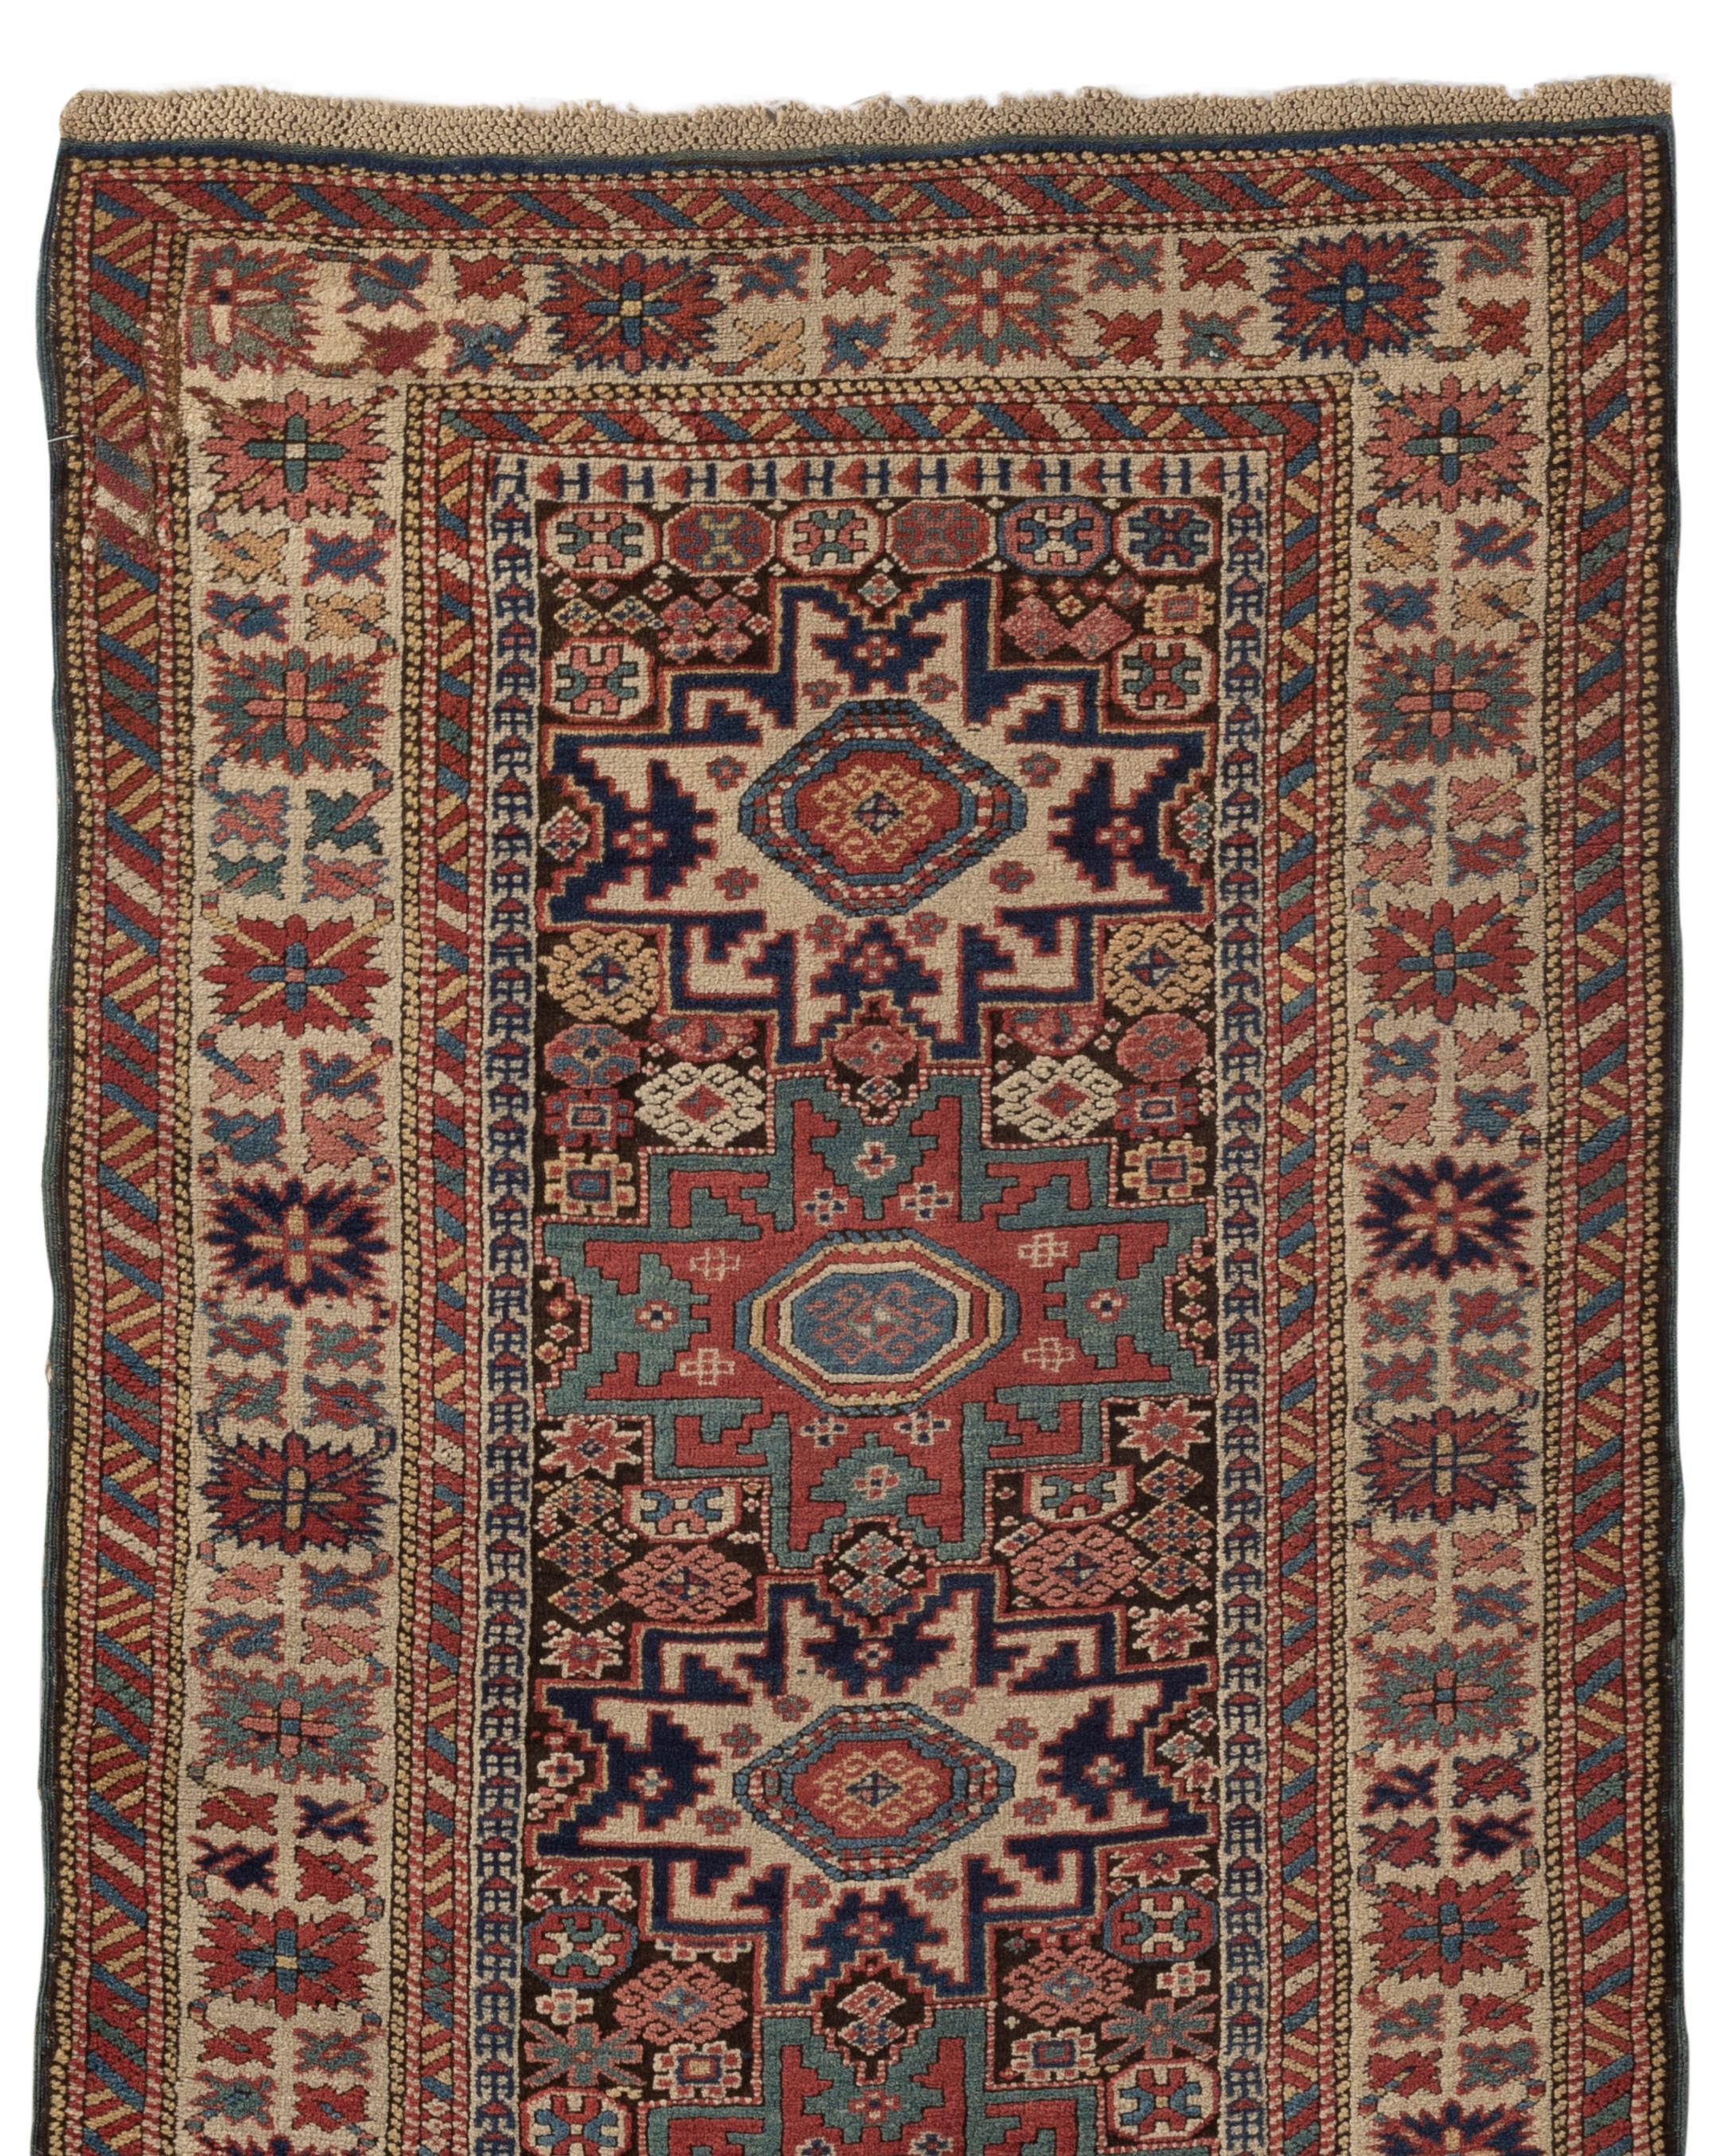 Antique Caucasian Kuba rug, circa 1880. From eastern Caucasia a handwoven antique Kuba rug the Caucasus Mountains, between Persia and Russia are justly famous for their colorful, geometric antique scatter rugs and this is a fine example. The detail